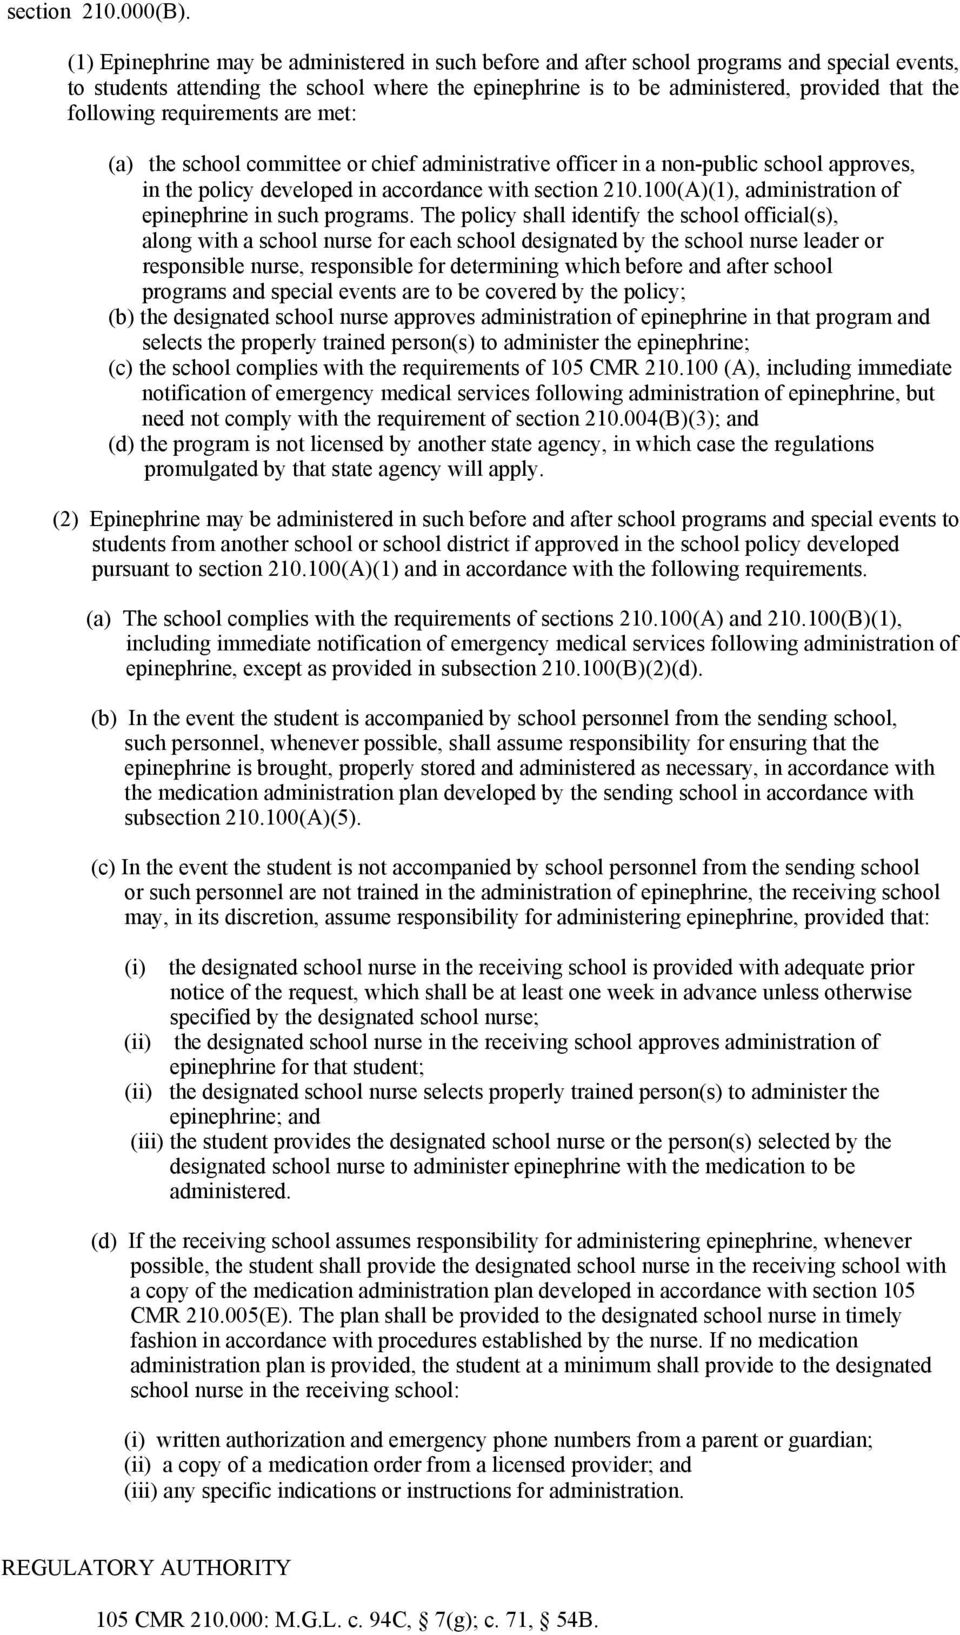 following requirements are met: (a) the school committee or chief administrative officer in a non-public school approves, in the policy developed in accordance with section 210.